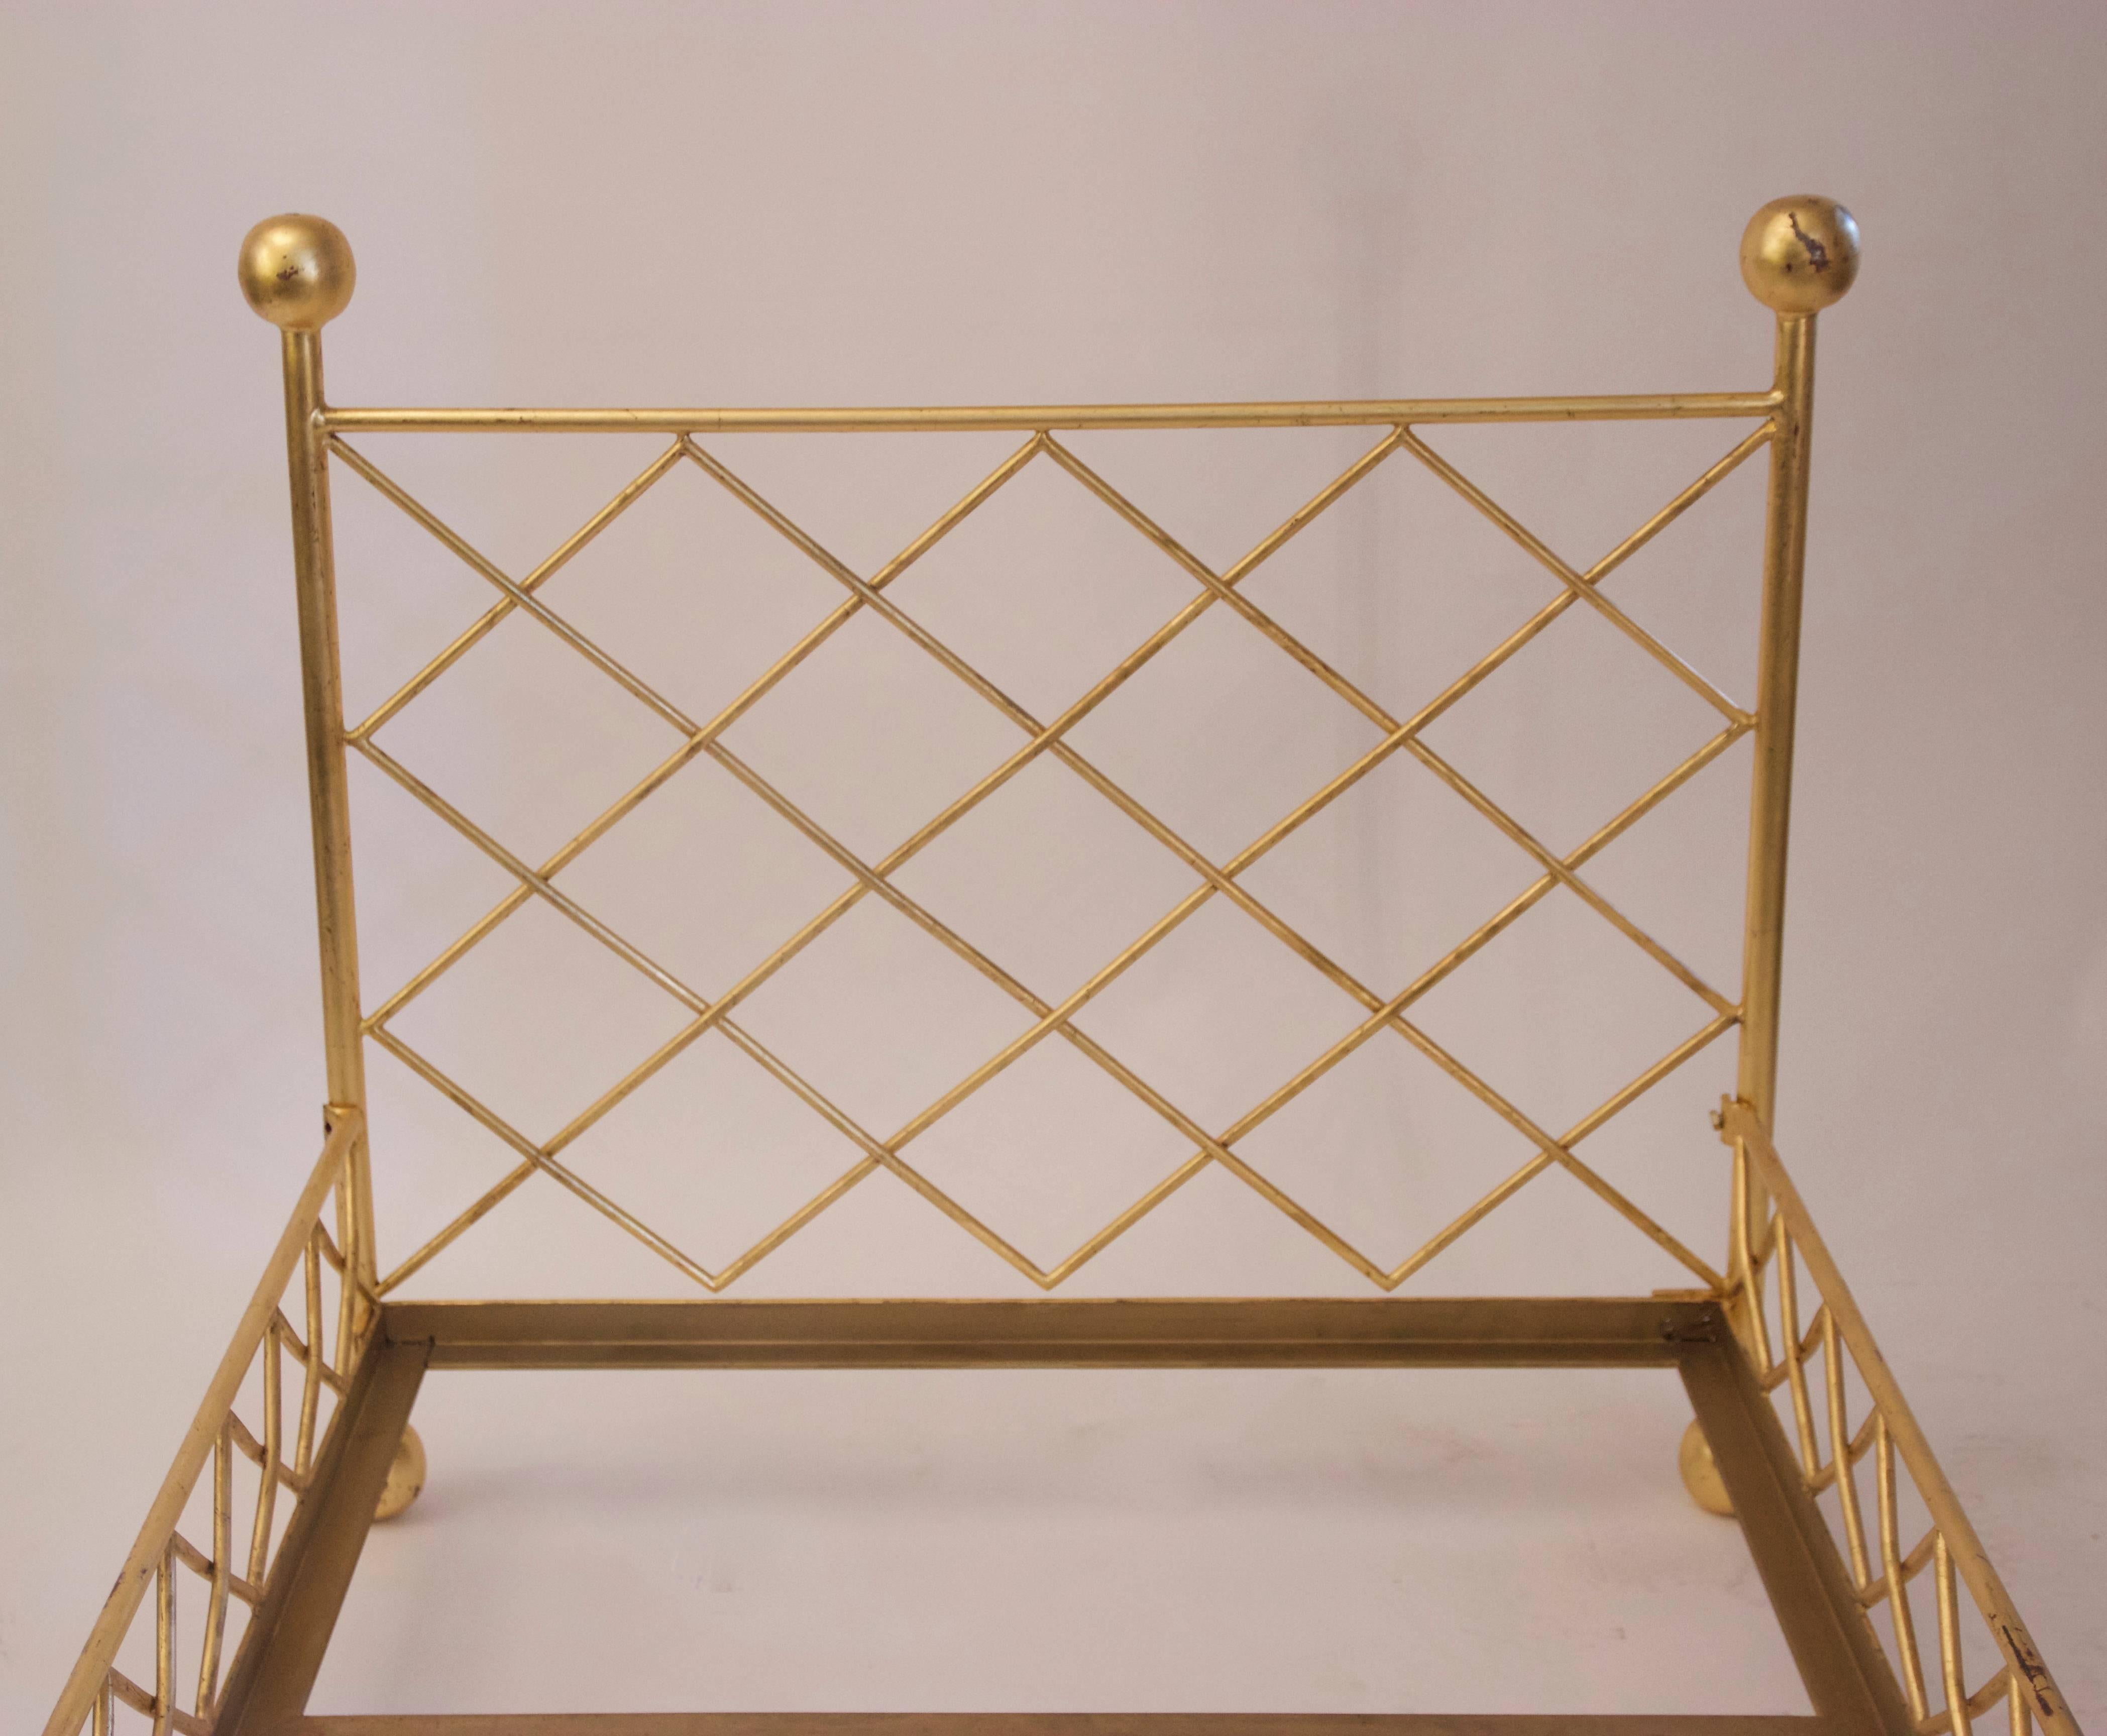 French Bed, Gilded Metal with Braces, circa 2000, France